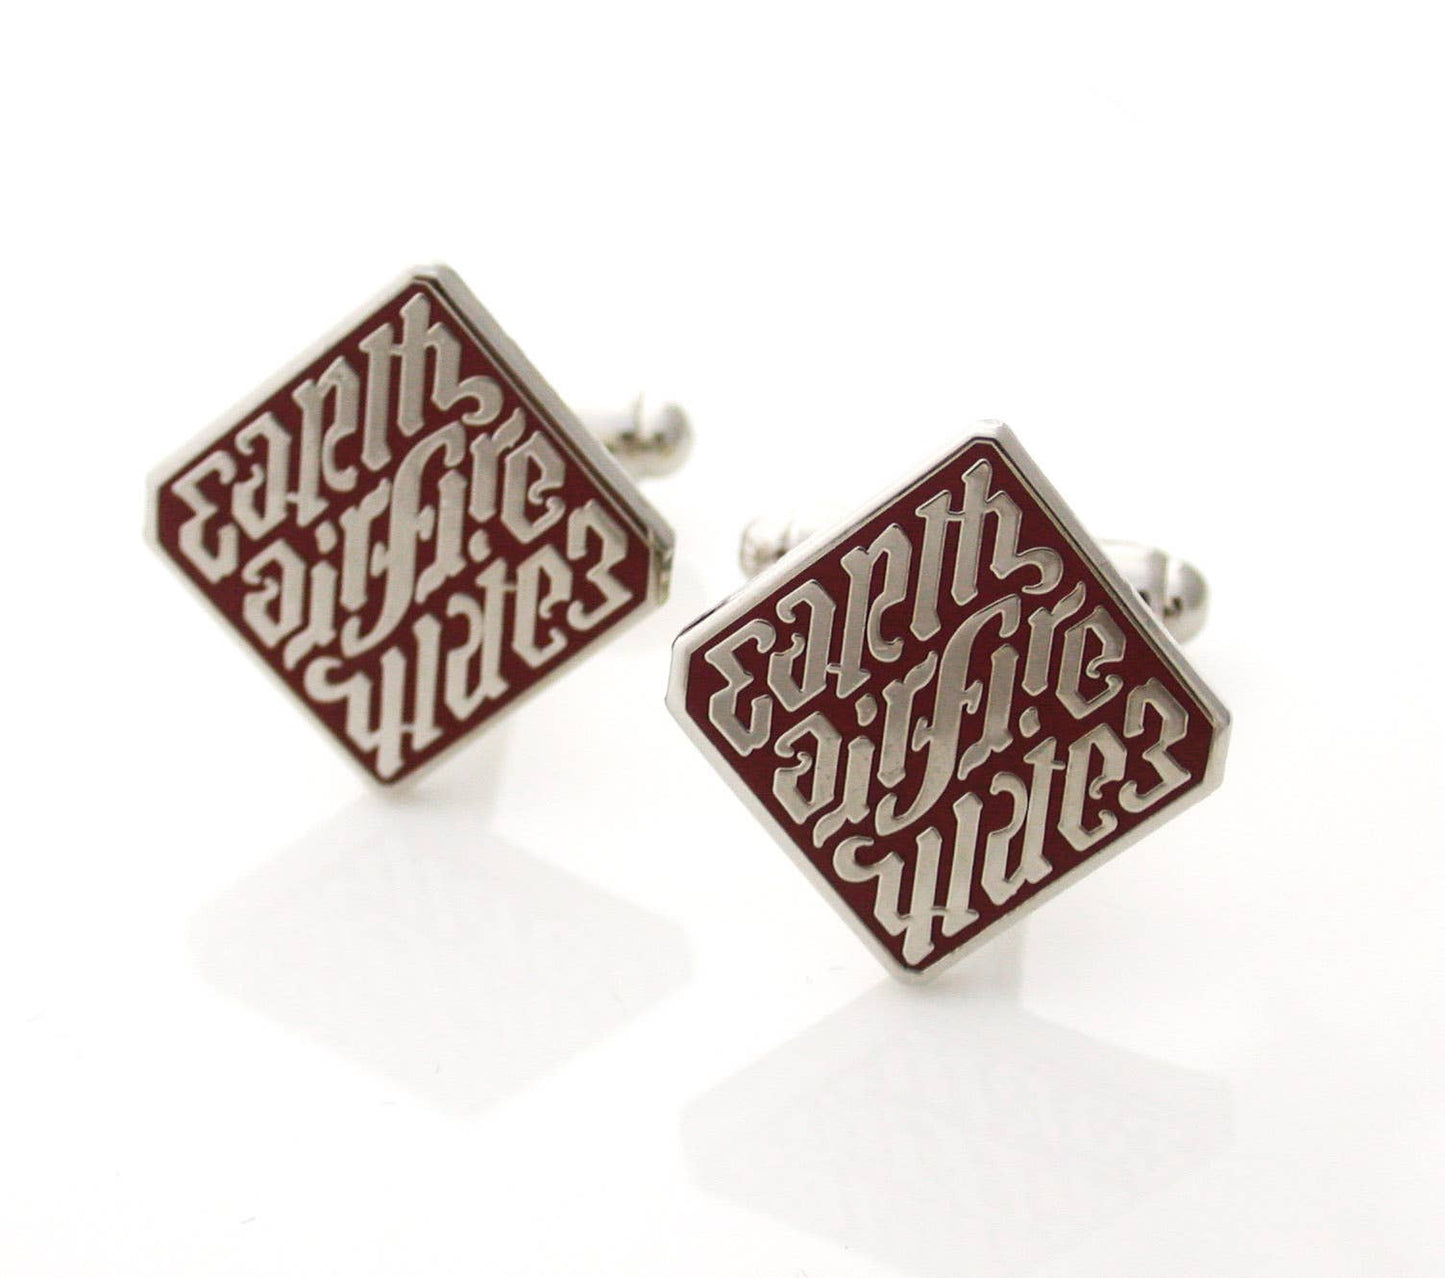 Small square cufflinks with words Fire Air Water in maroon enamel